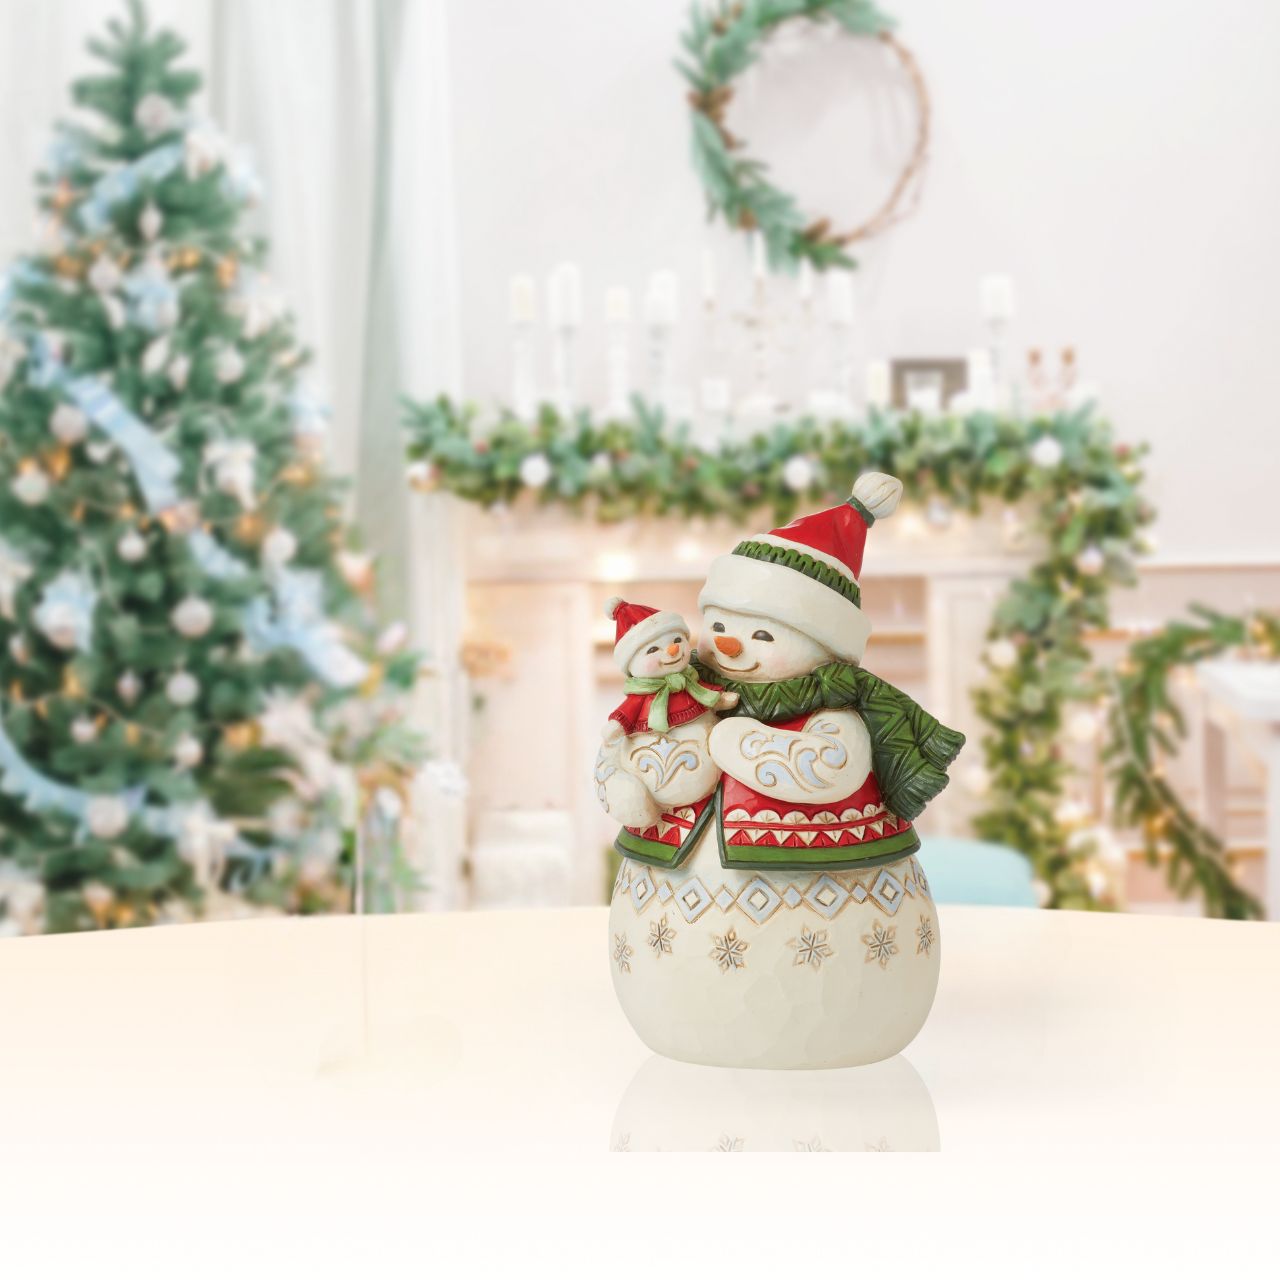 Heartwood Creek  Pint Sized Snowmom With Baby Figurine  Traditional Heartwood Creek Collection; Wood carved textures and intricately detailed designs. This collection of festive pint sized figurines are the perfect addition to a collection, without breaking the bank.